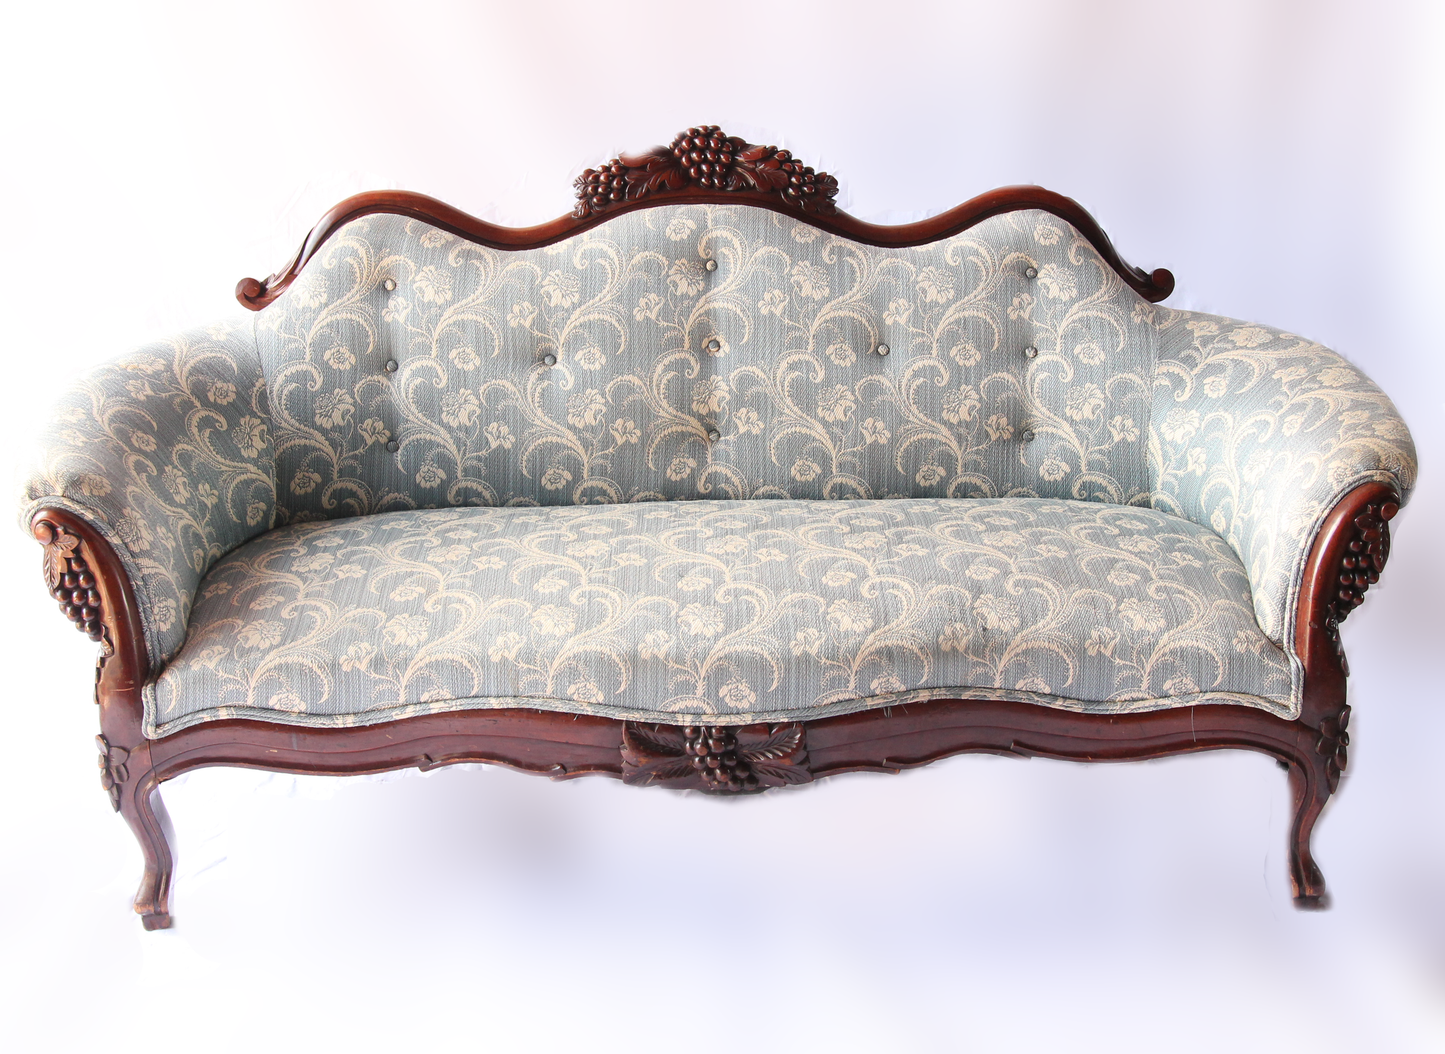 Ornate Blue Upholstered Victorian Camelback Sofa with Grape Carving Motif